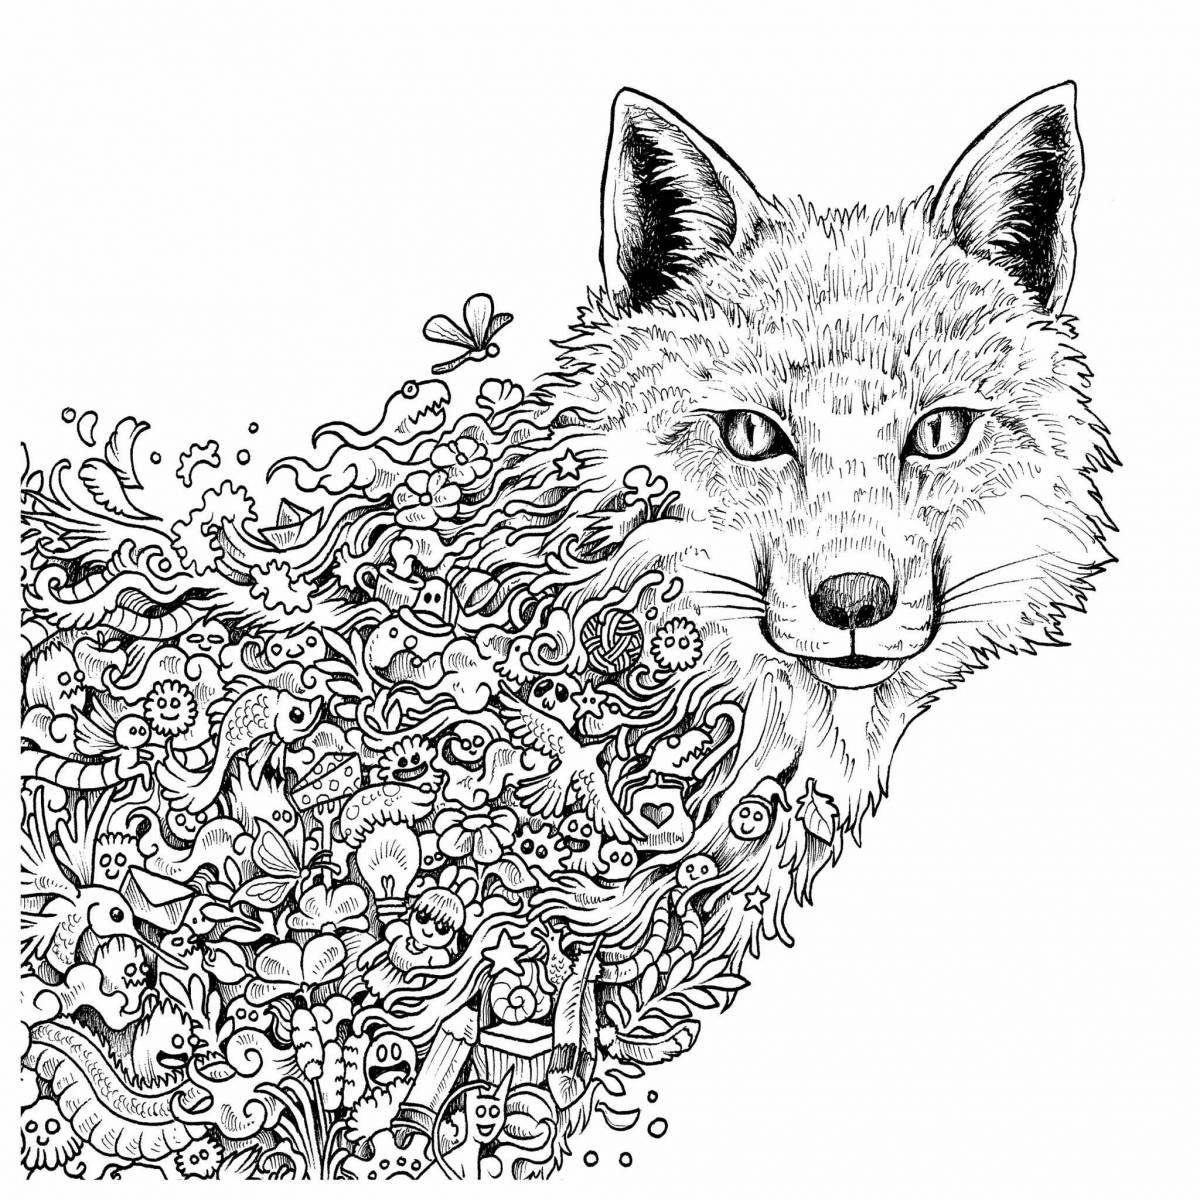 Frightening wolf complex coloring book